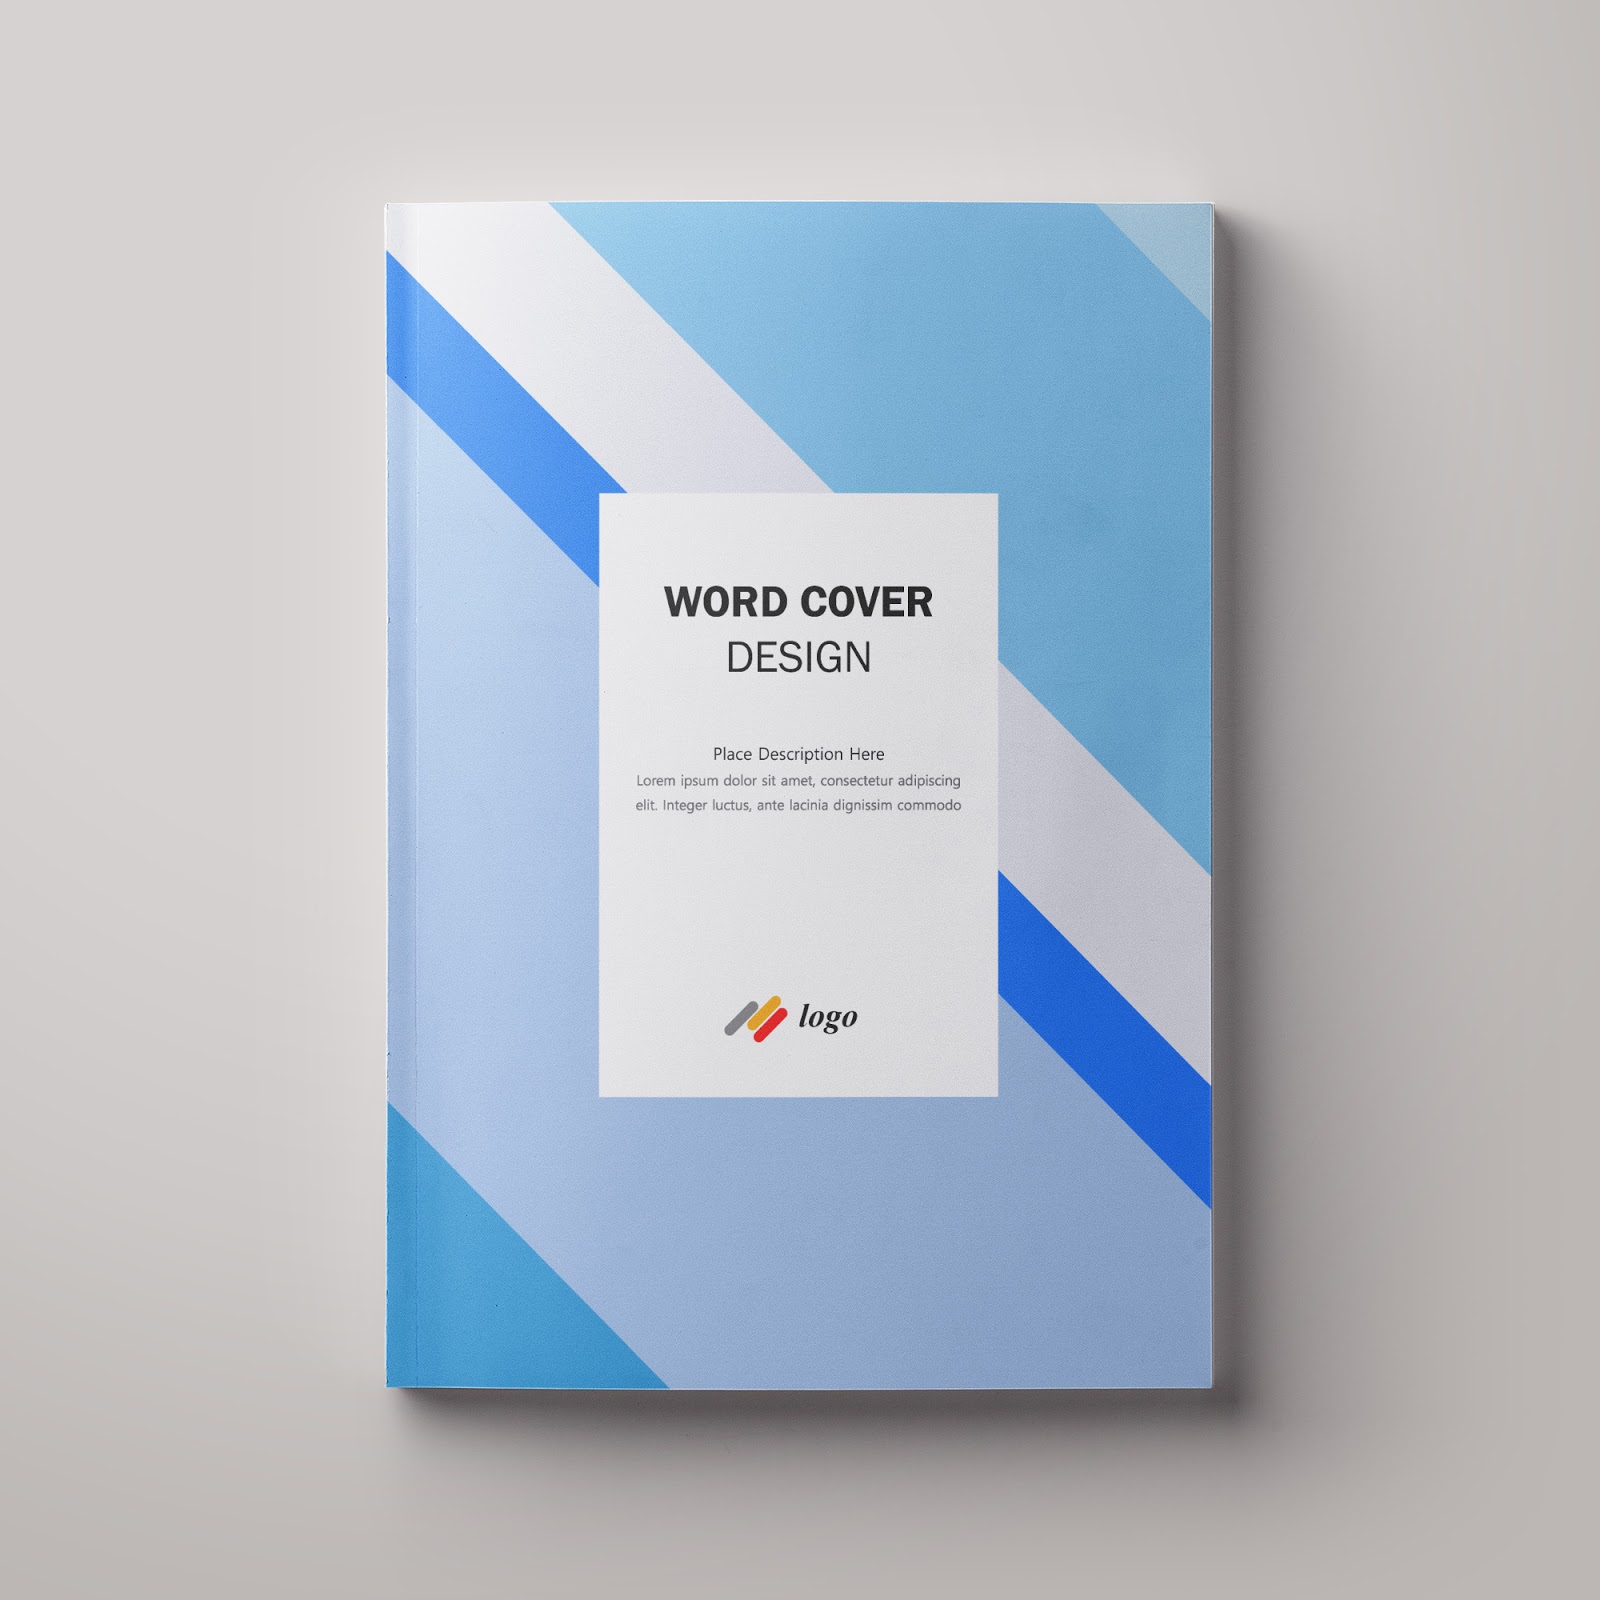 Microsoft Word Cover Templates | 85 Free Download - Word Free